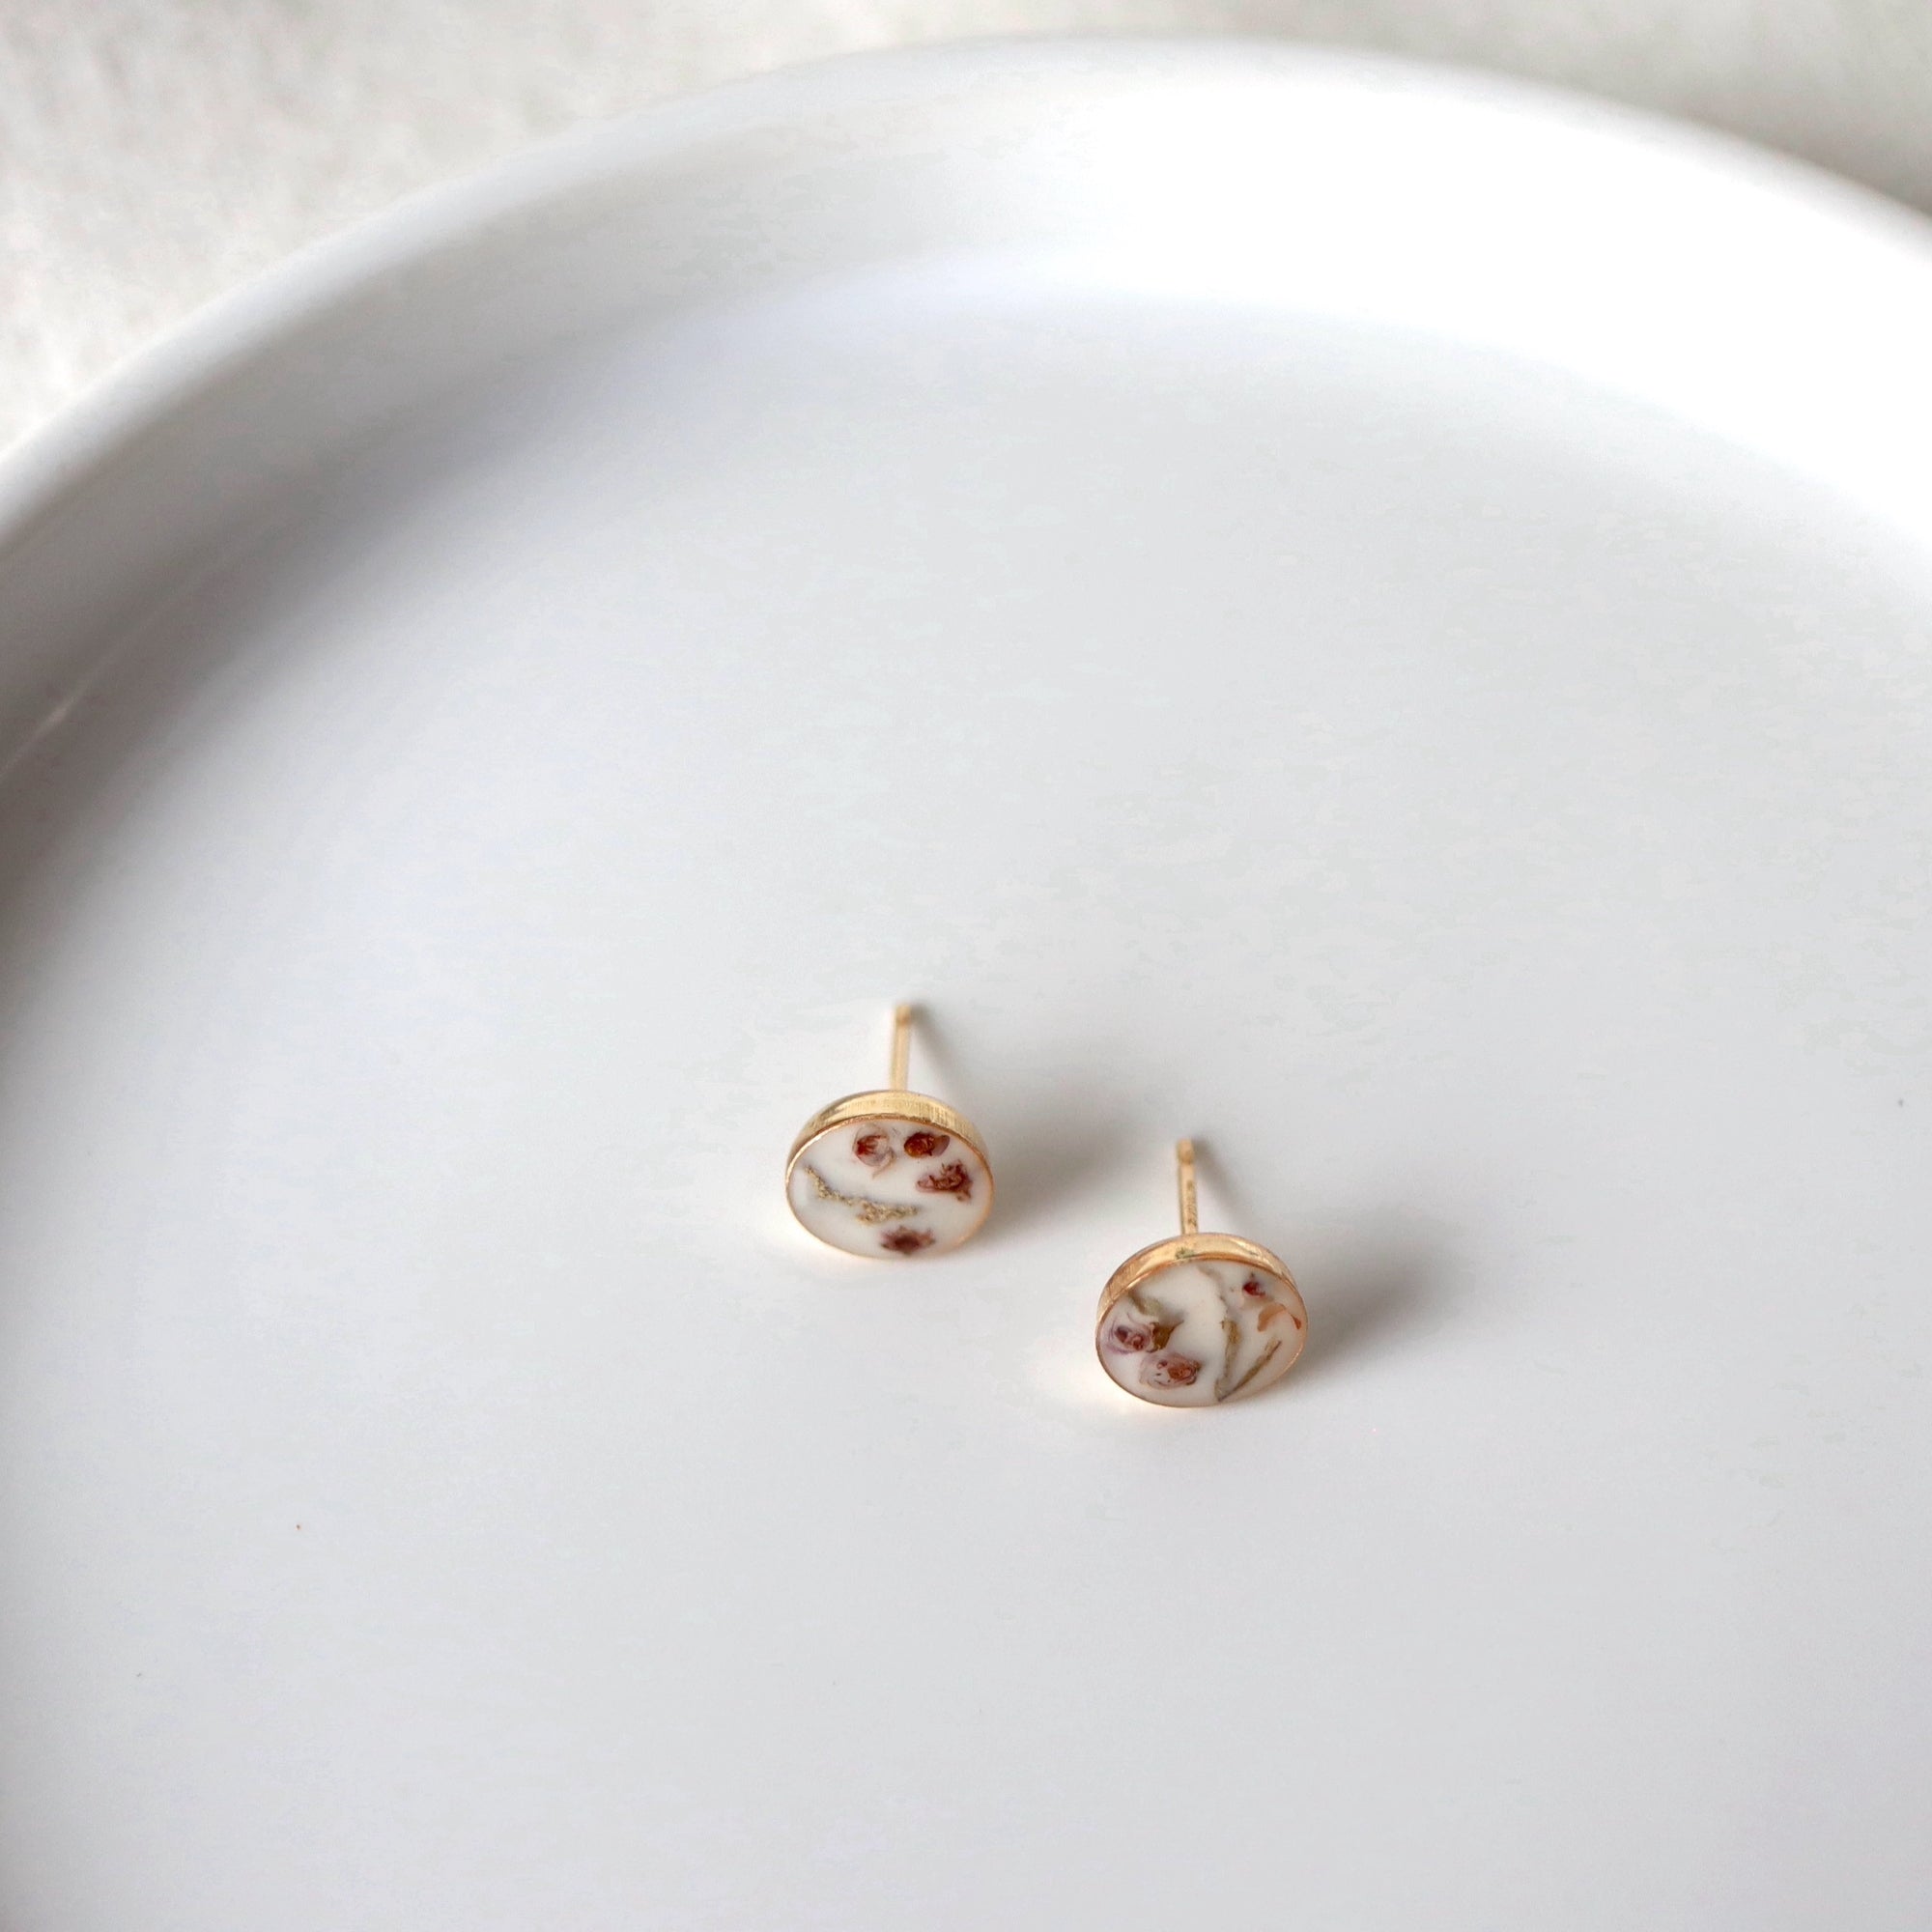 heather flower fragments sit inside 8mm gold earring stud cups. jewelry by Wild Blue Yonder Amber Aasman